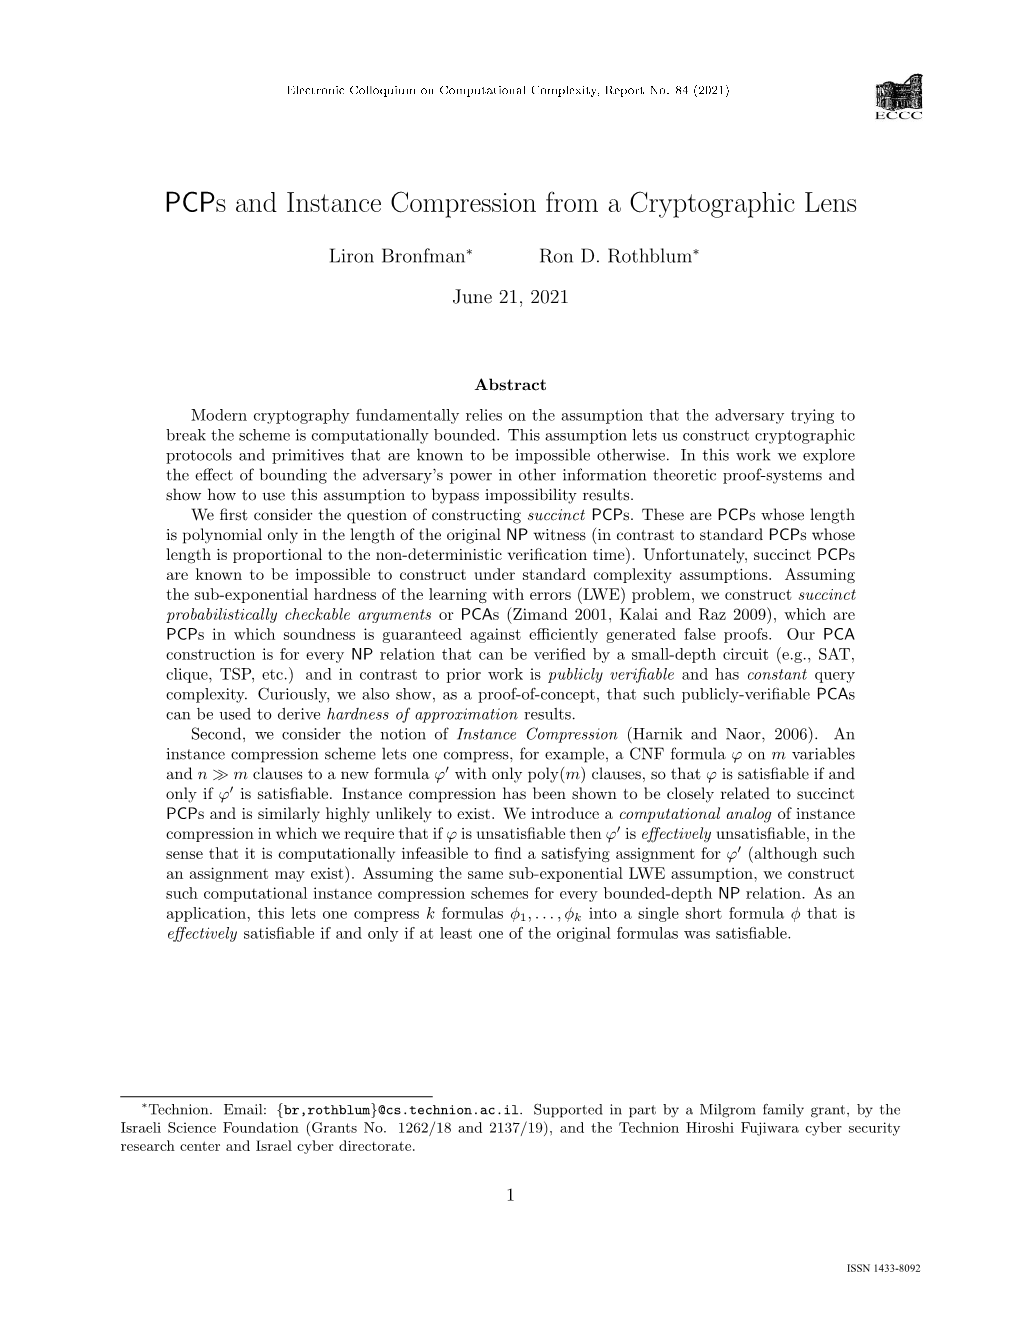 Pcps and Instance Compression from a Cryptographic Lens